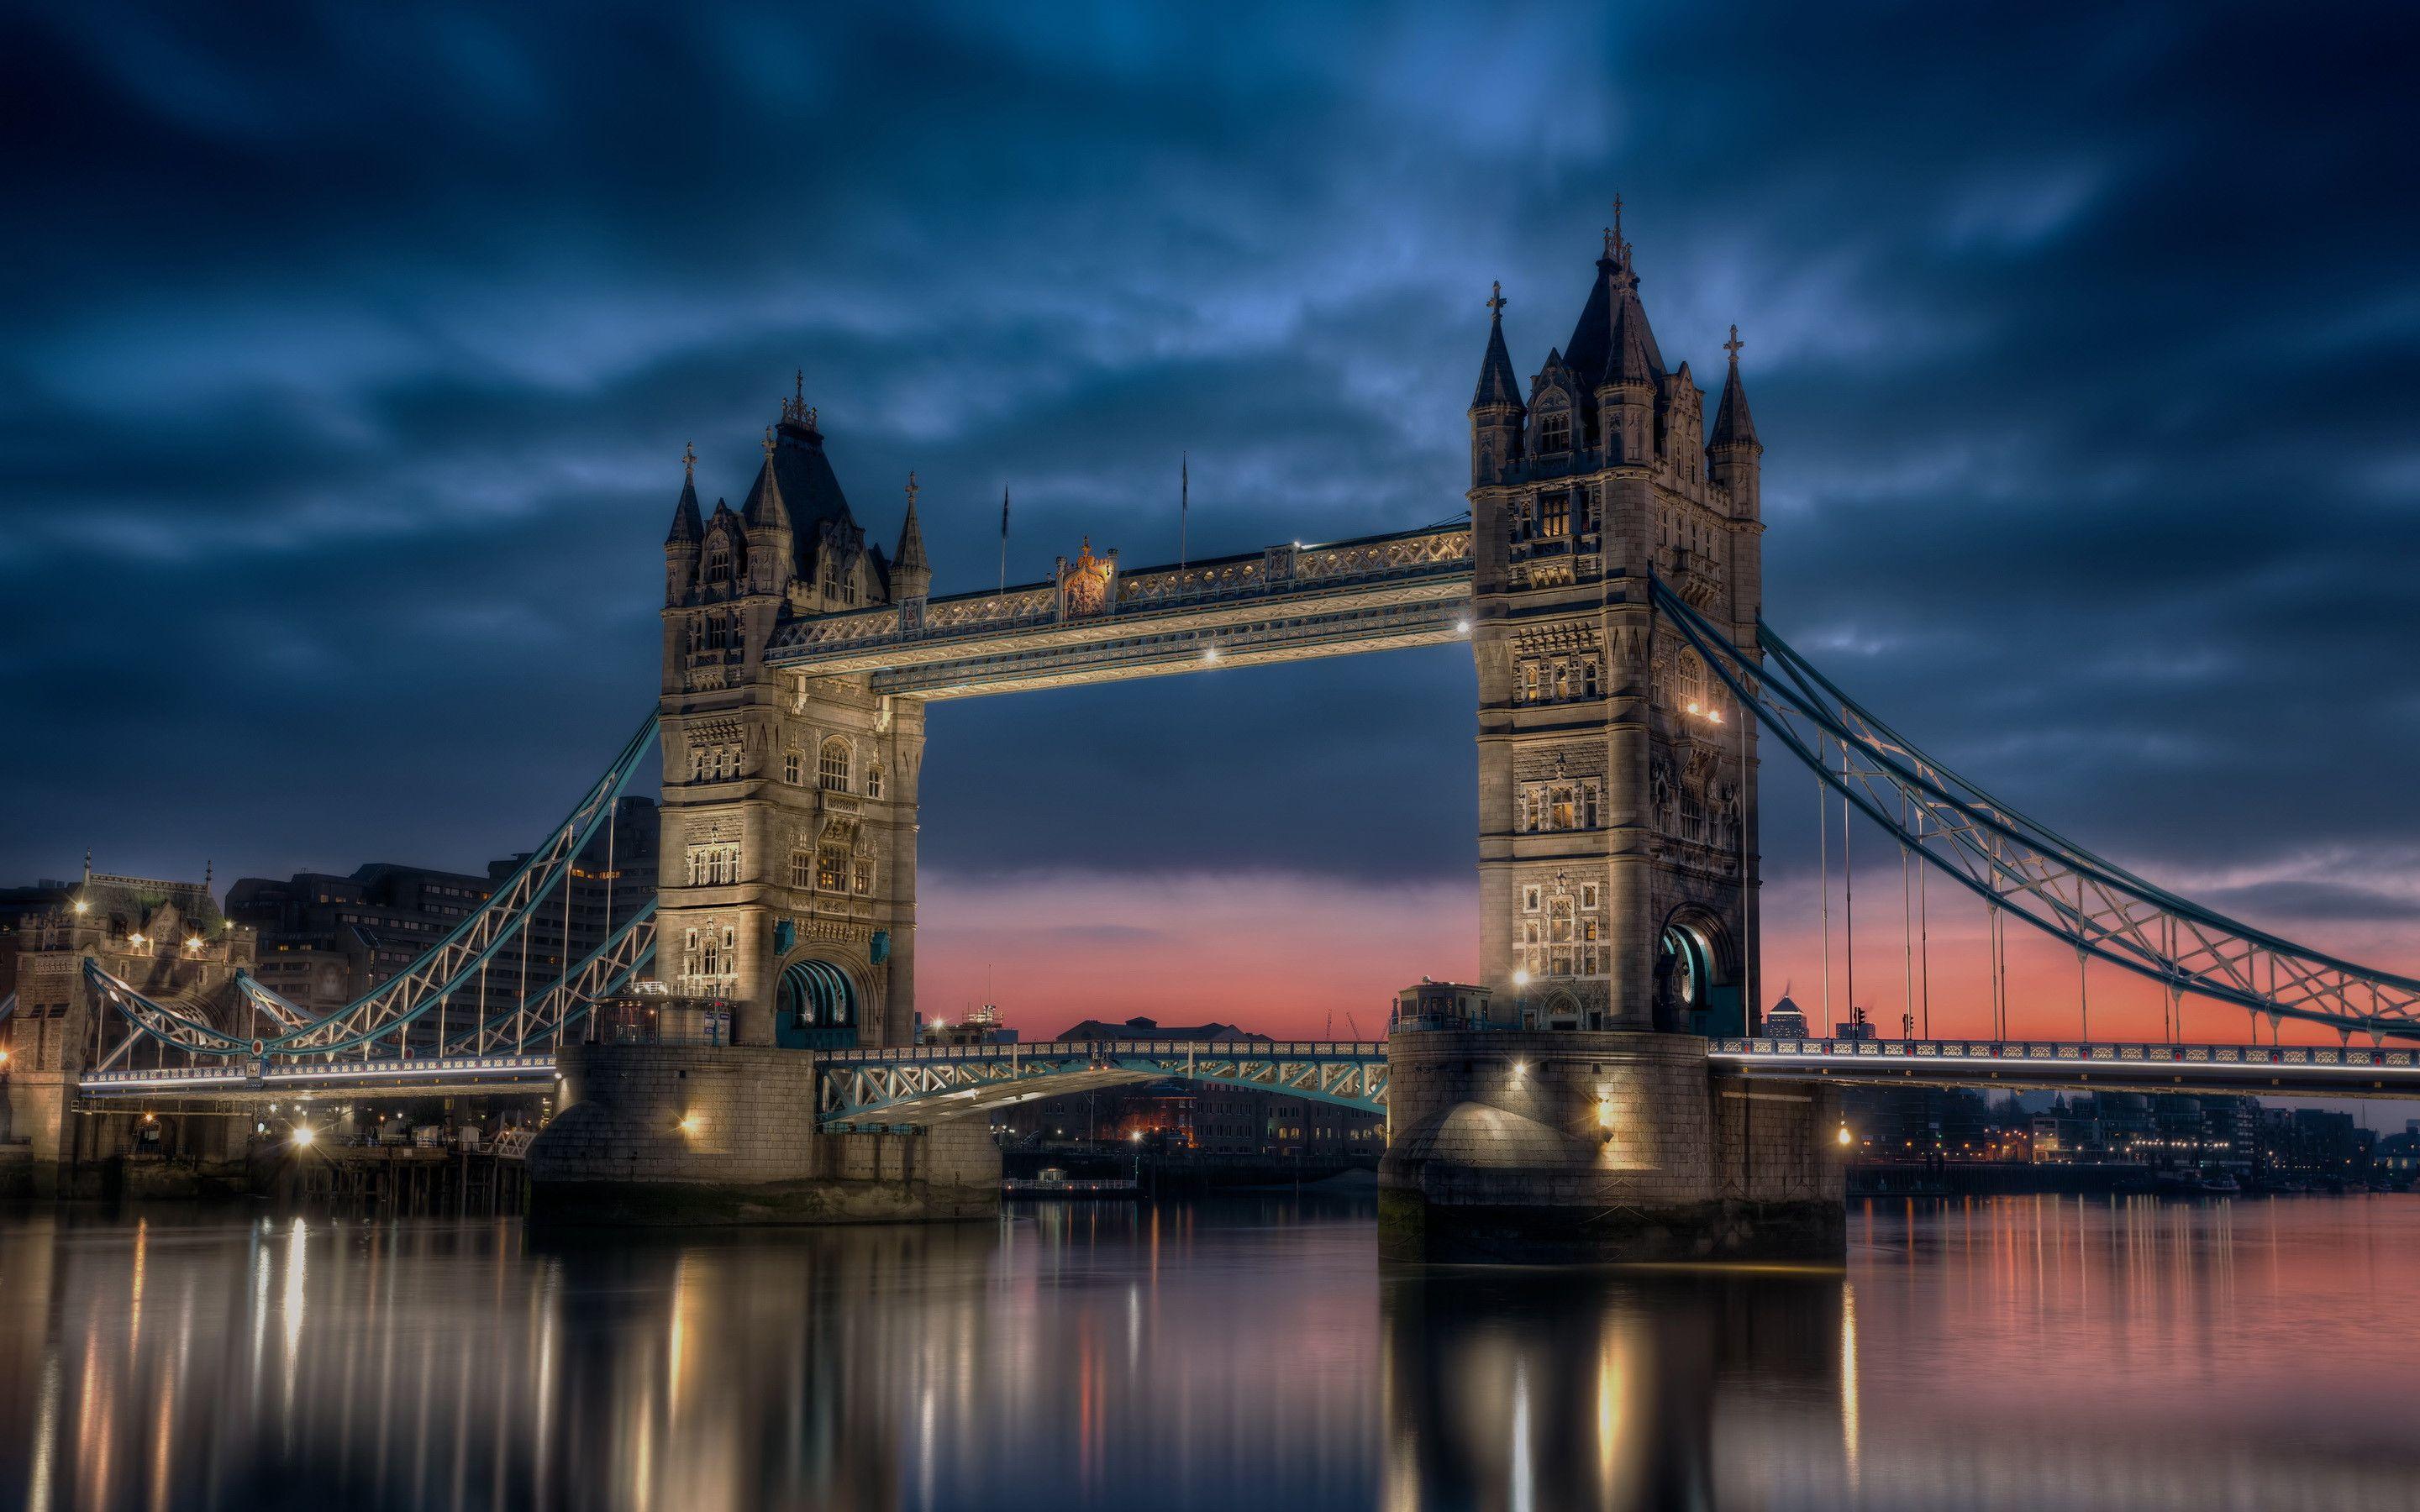 CdHBH 10x8ft Famous Tower Bridge of London Backdrop Vinyl Photography Background Tower Bridge in Storm Forked Lightning City Nightscape Backdrop Wallpaper Activity Background Photo Studio Props